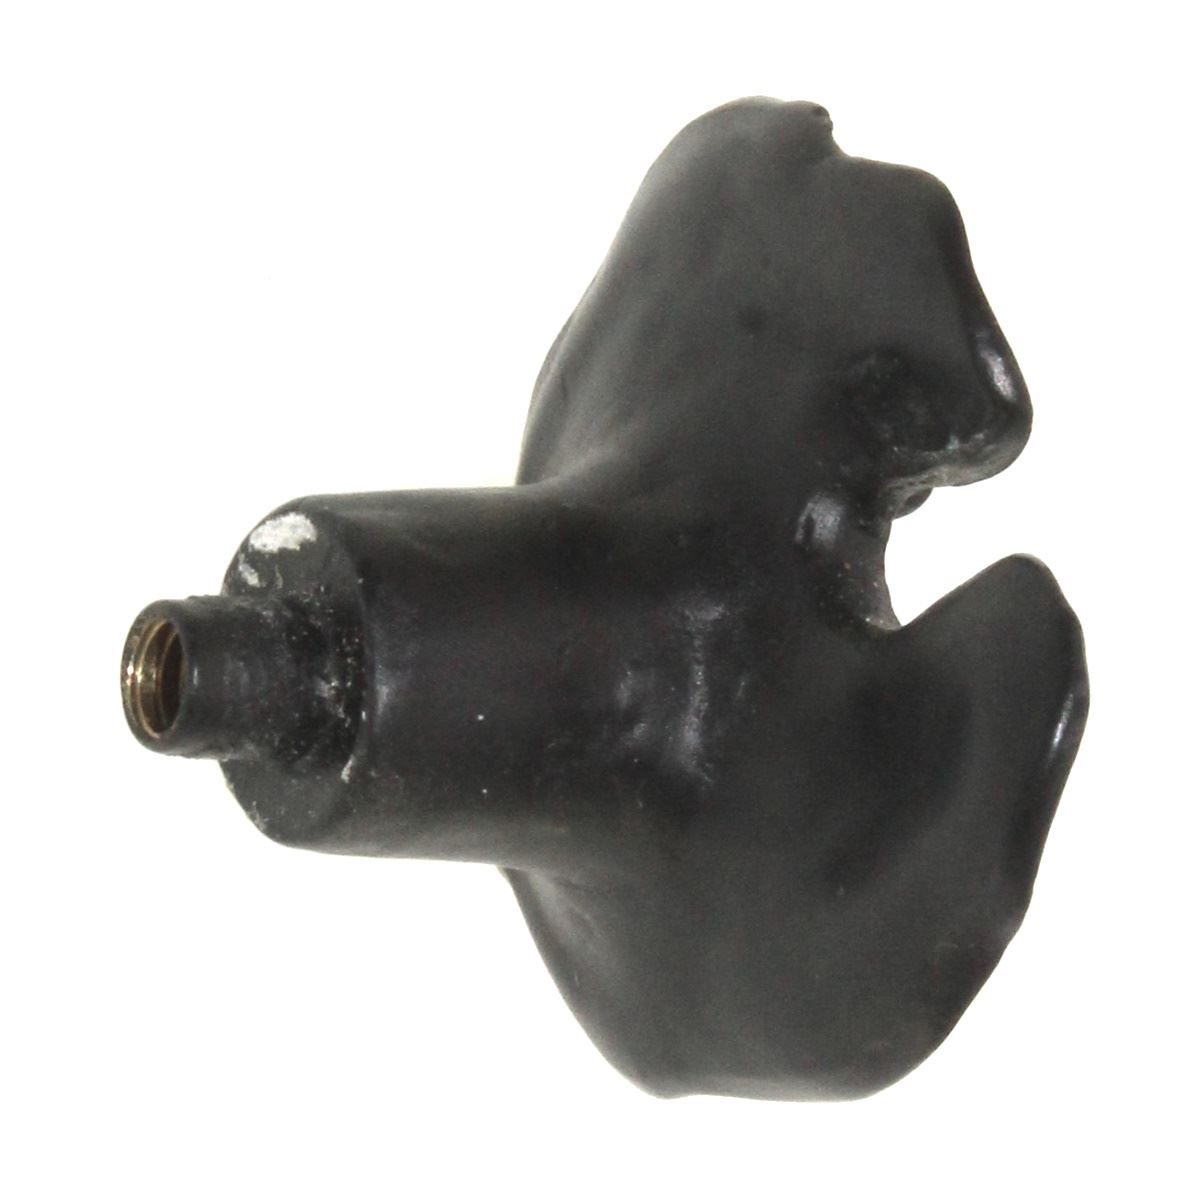 Anne at Home Frogs & Lily Pads Black Frog on Lily Pad 1 3/8" Cabinet Knob 519-7